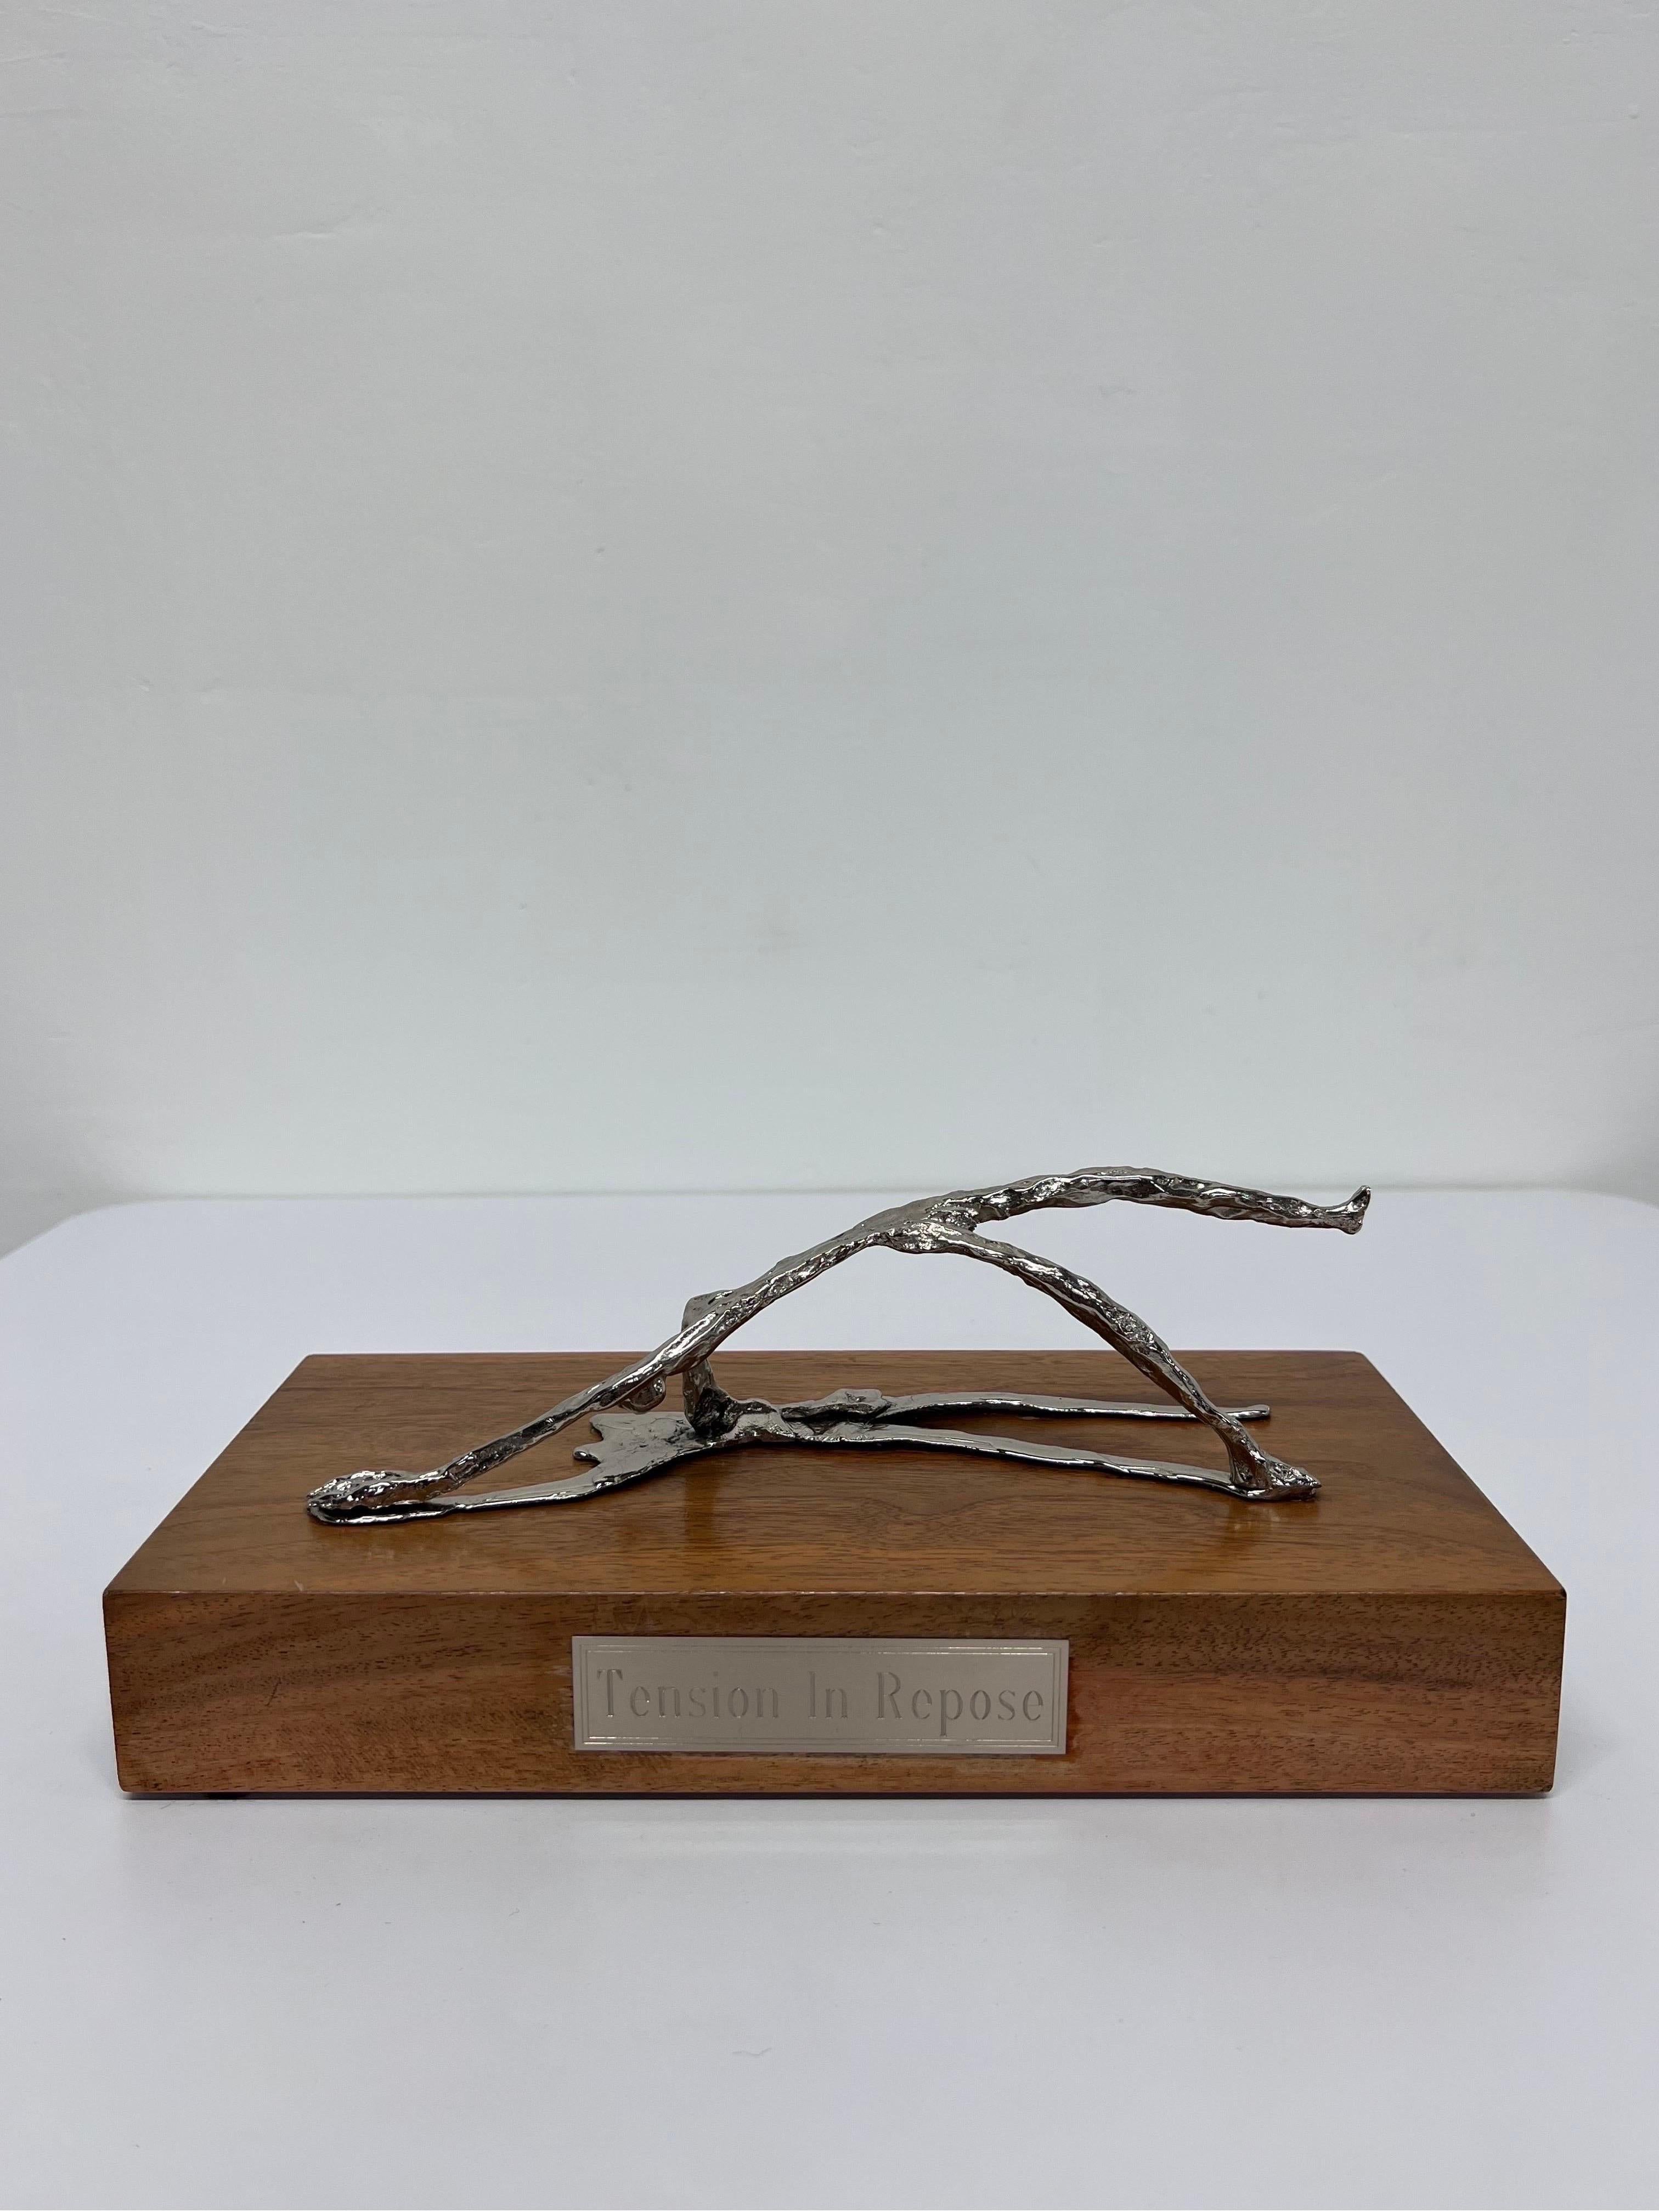 Sculptural polished steel figure on wood base titled Tension in Repose.